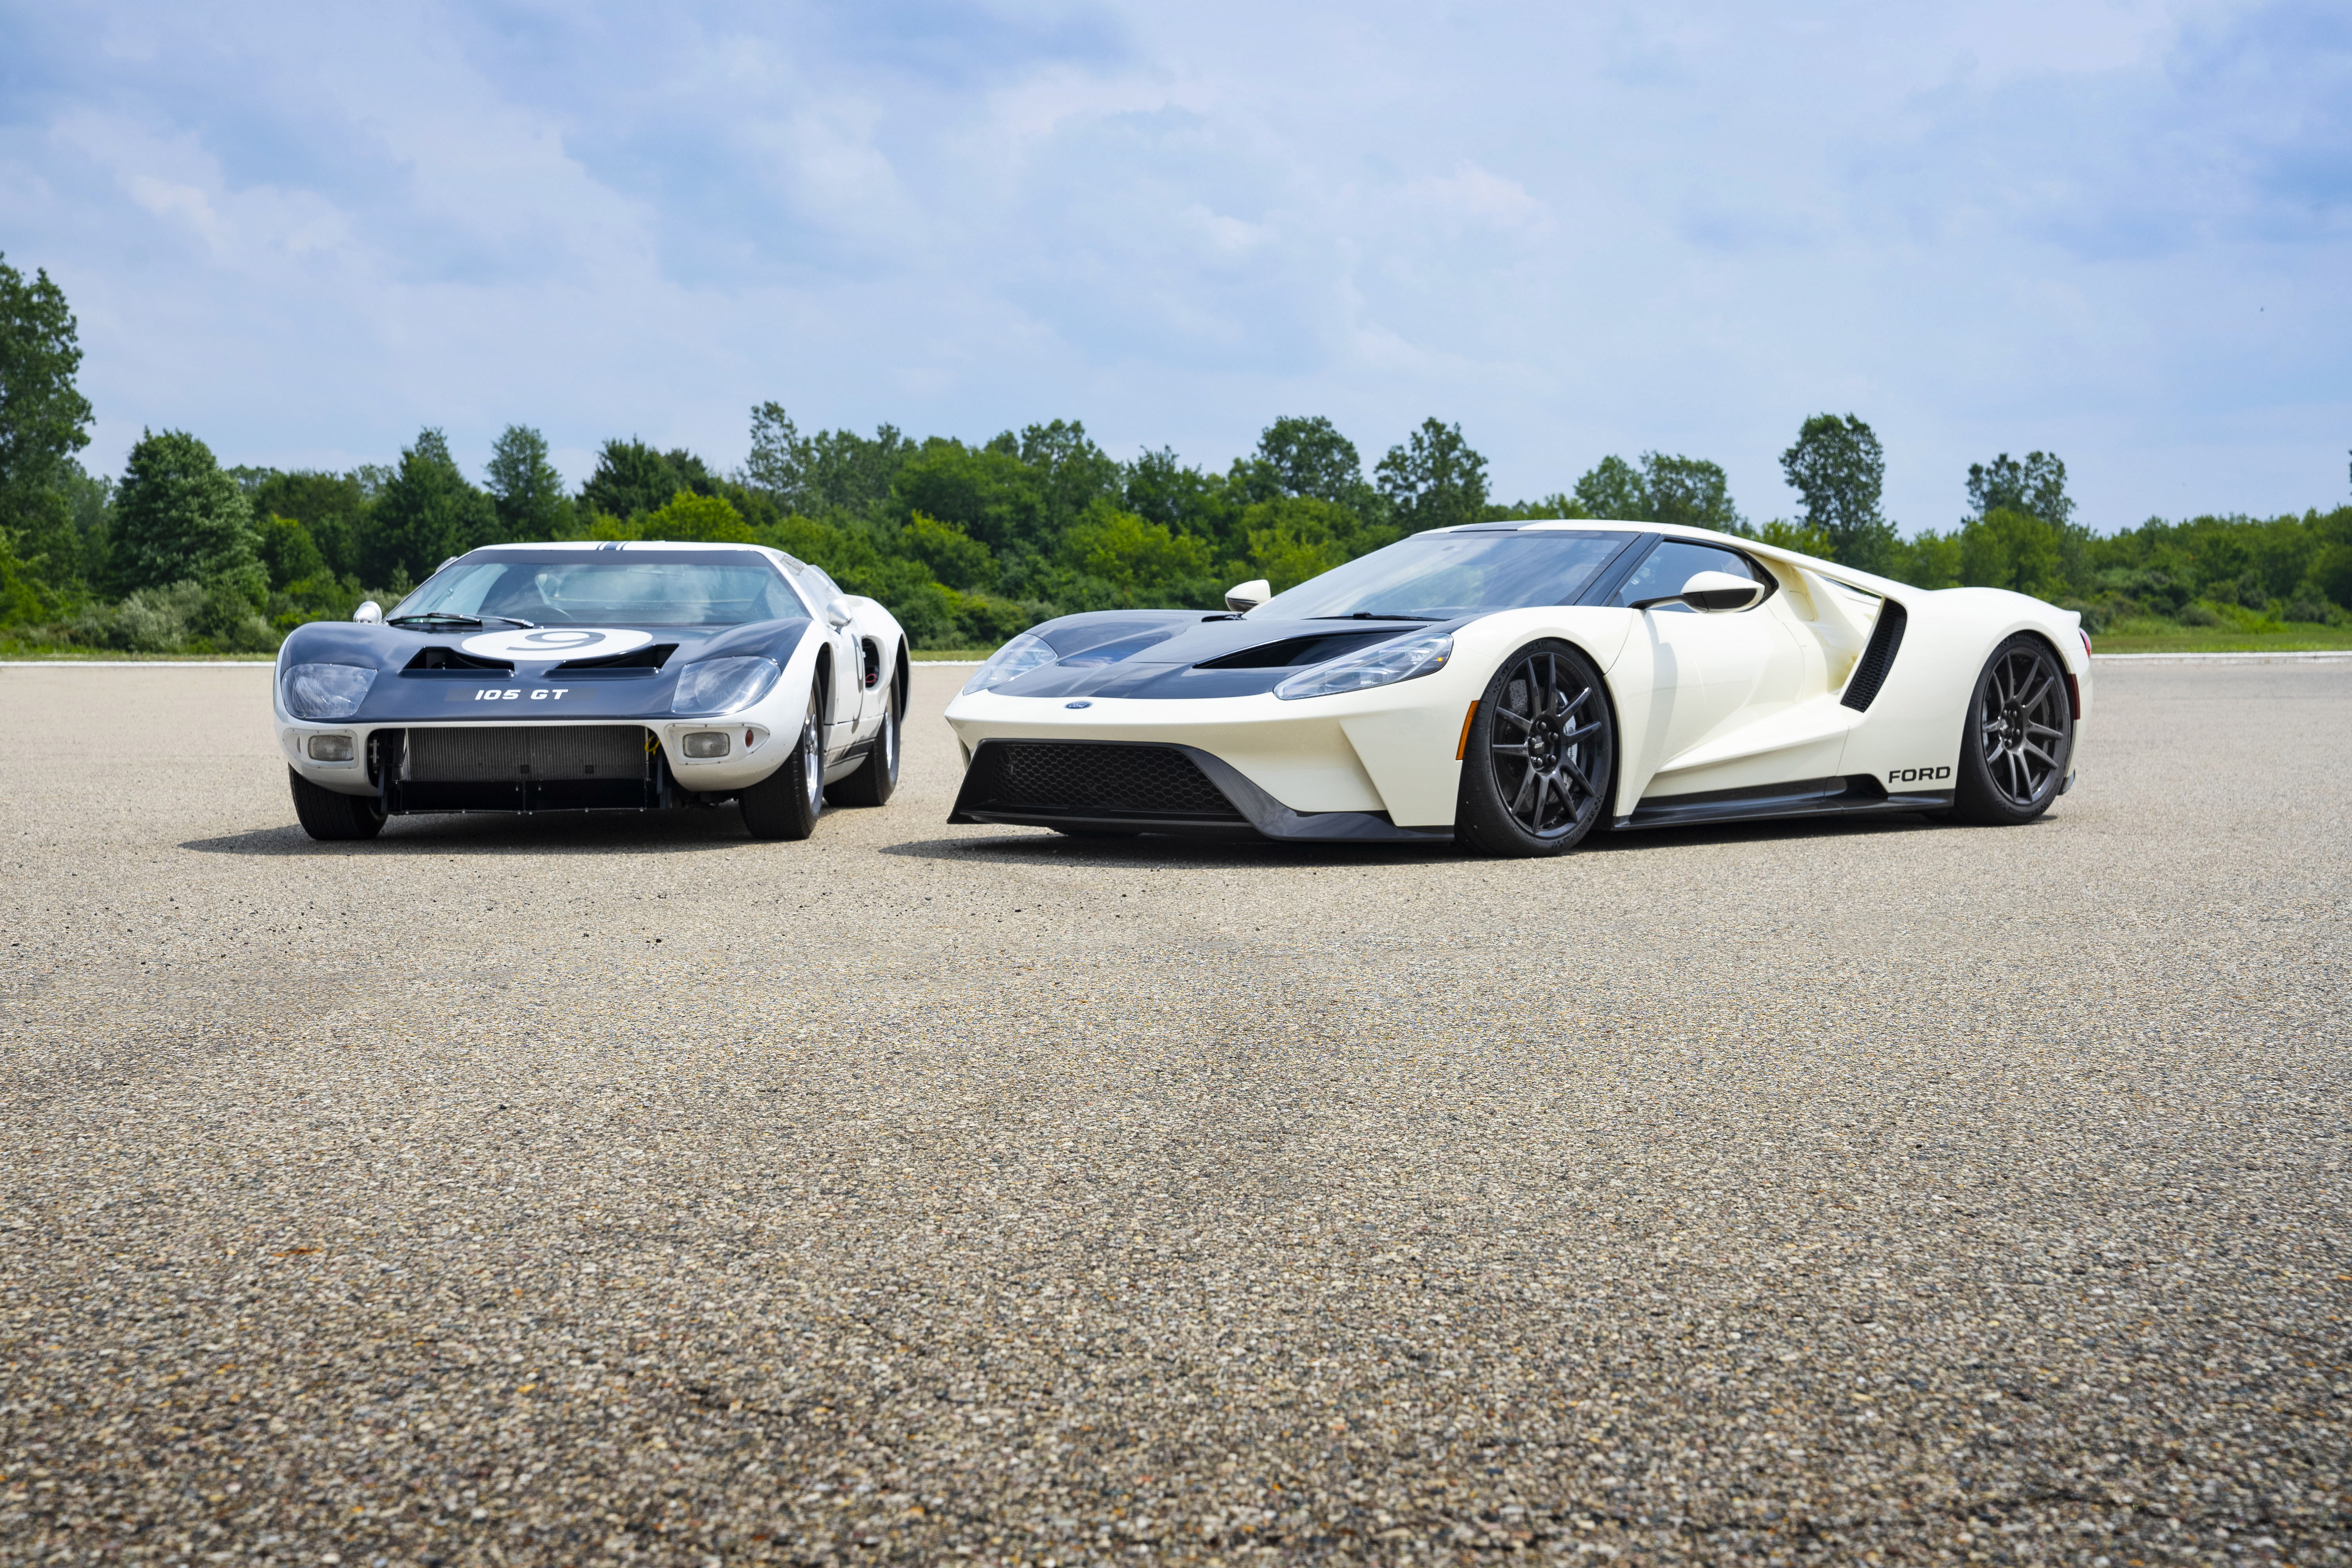 Preproduction 2022 Ford GT Heritage Edition shown.   1964 Ford GT Prototype shown. Closed course..